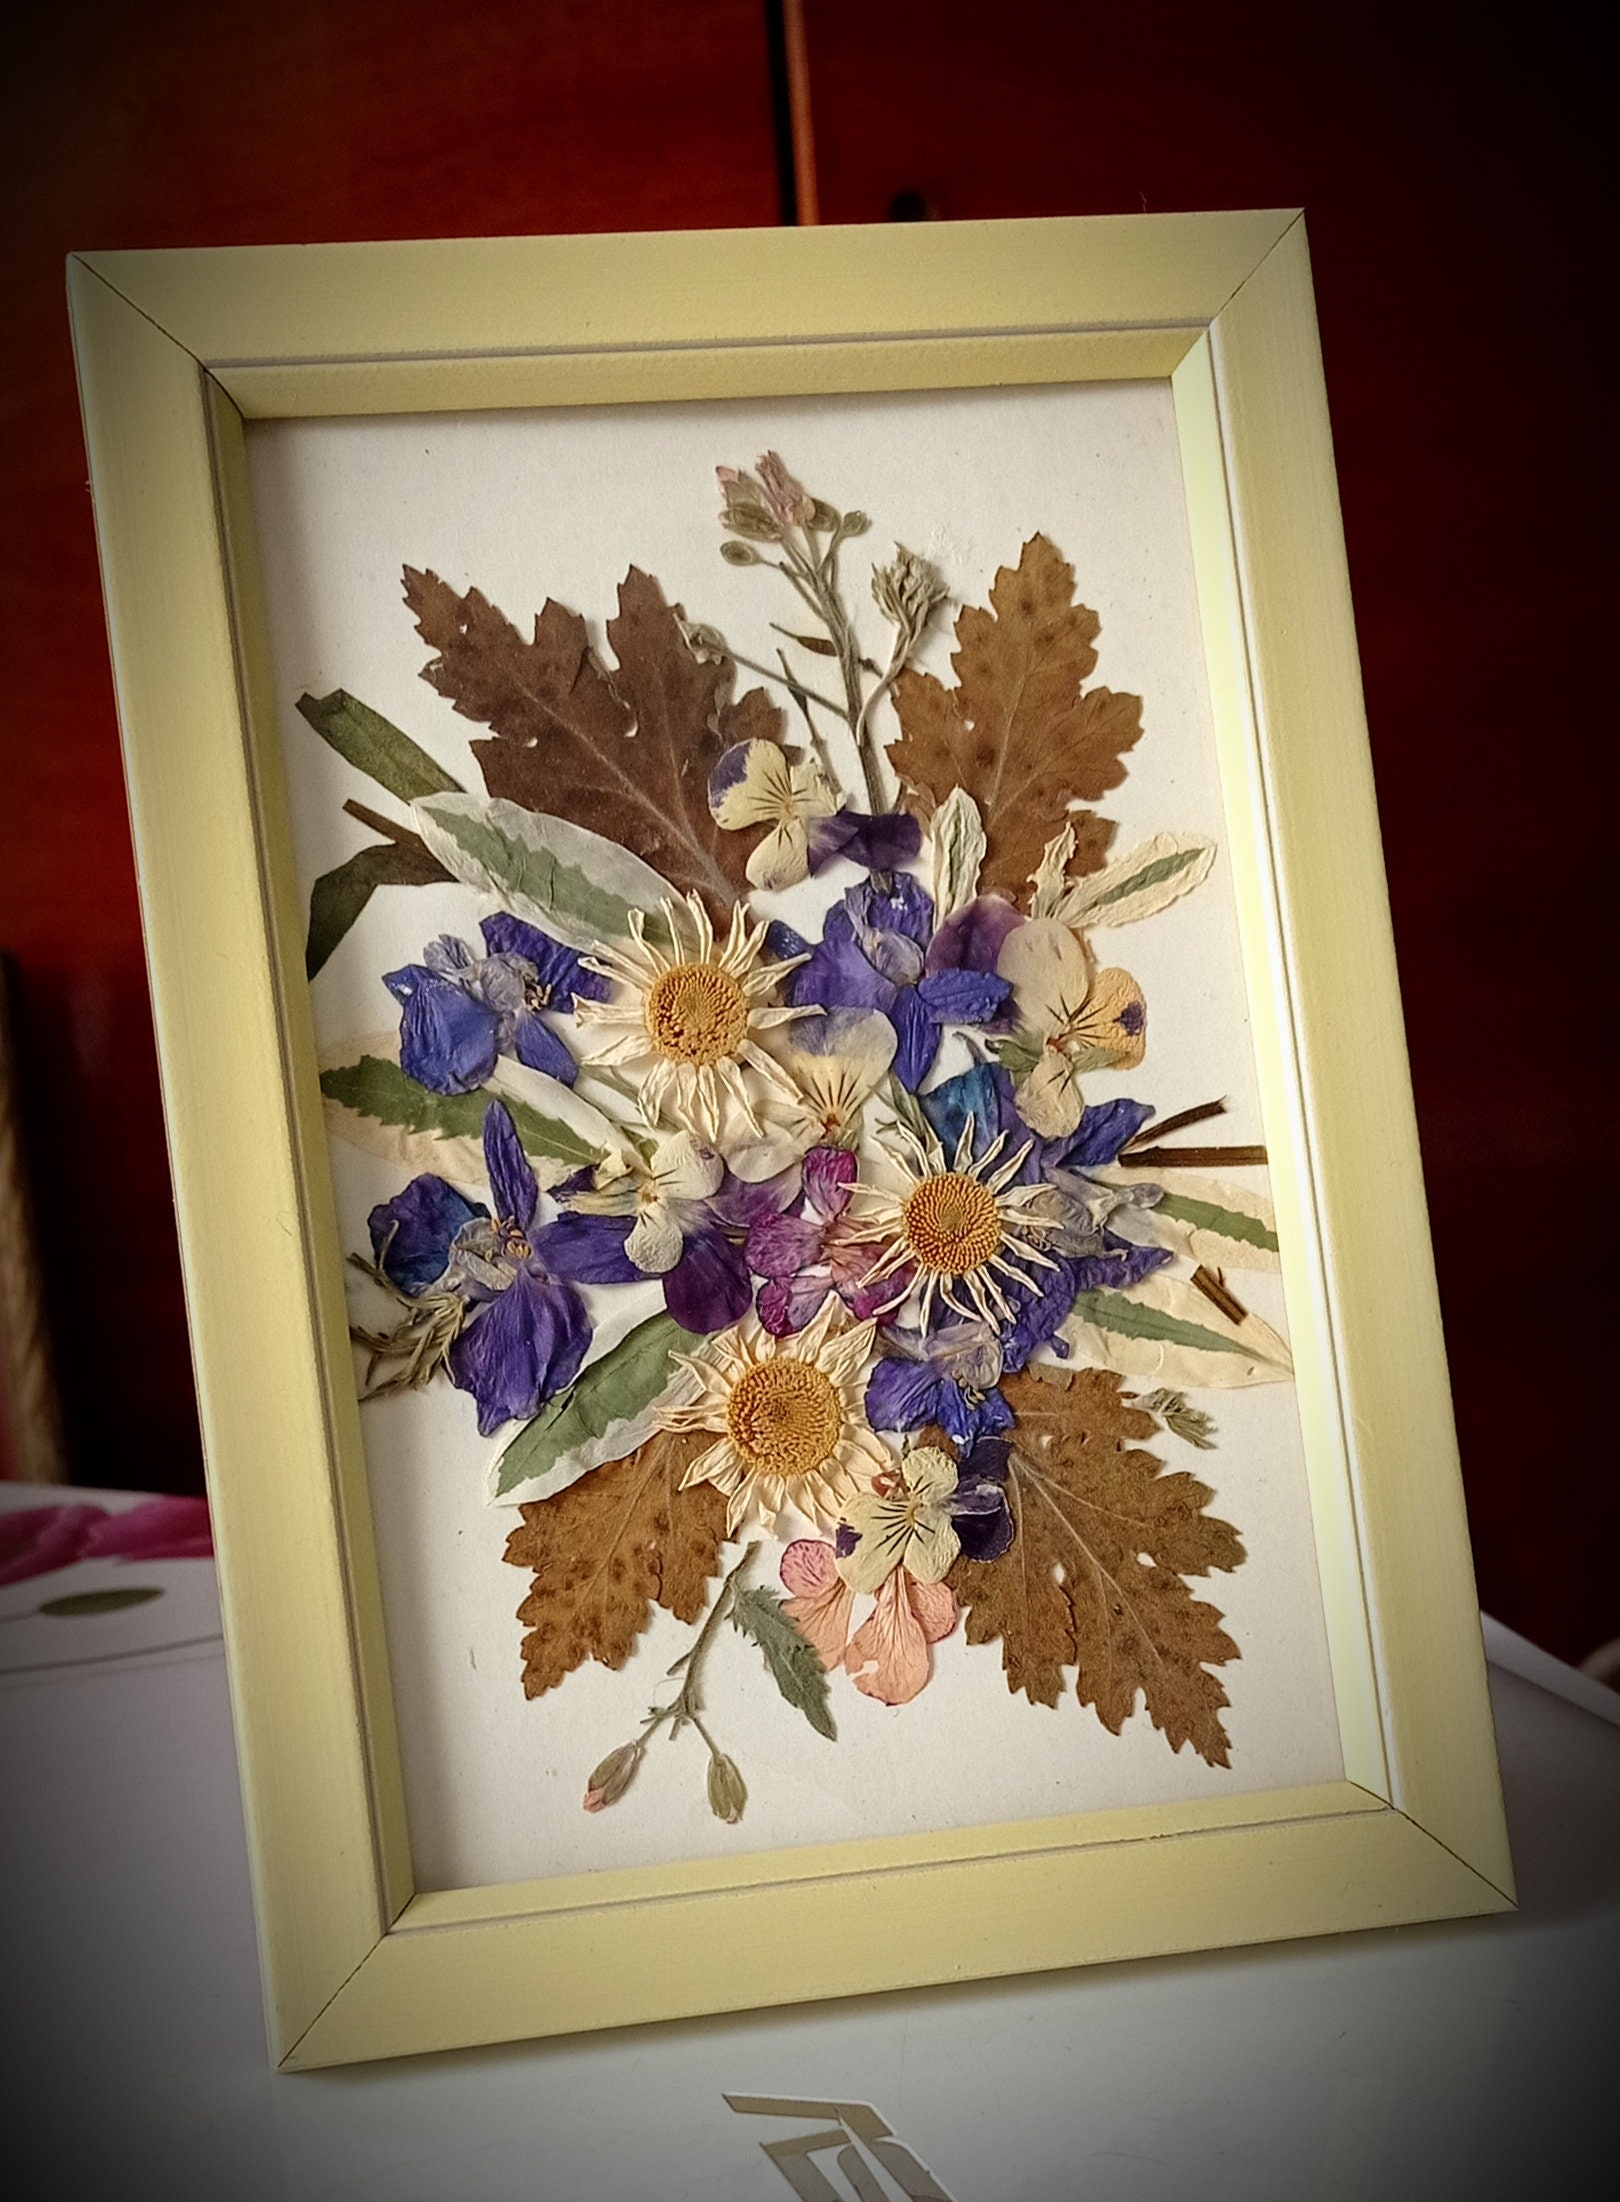 Oshibana art made of real pressed flowers and dried plants, Unique handmade  decor made by me, : r/crafts